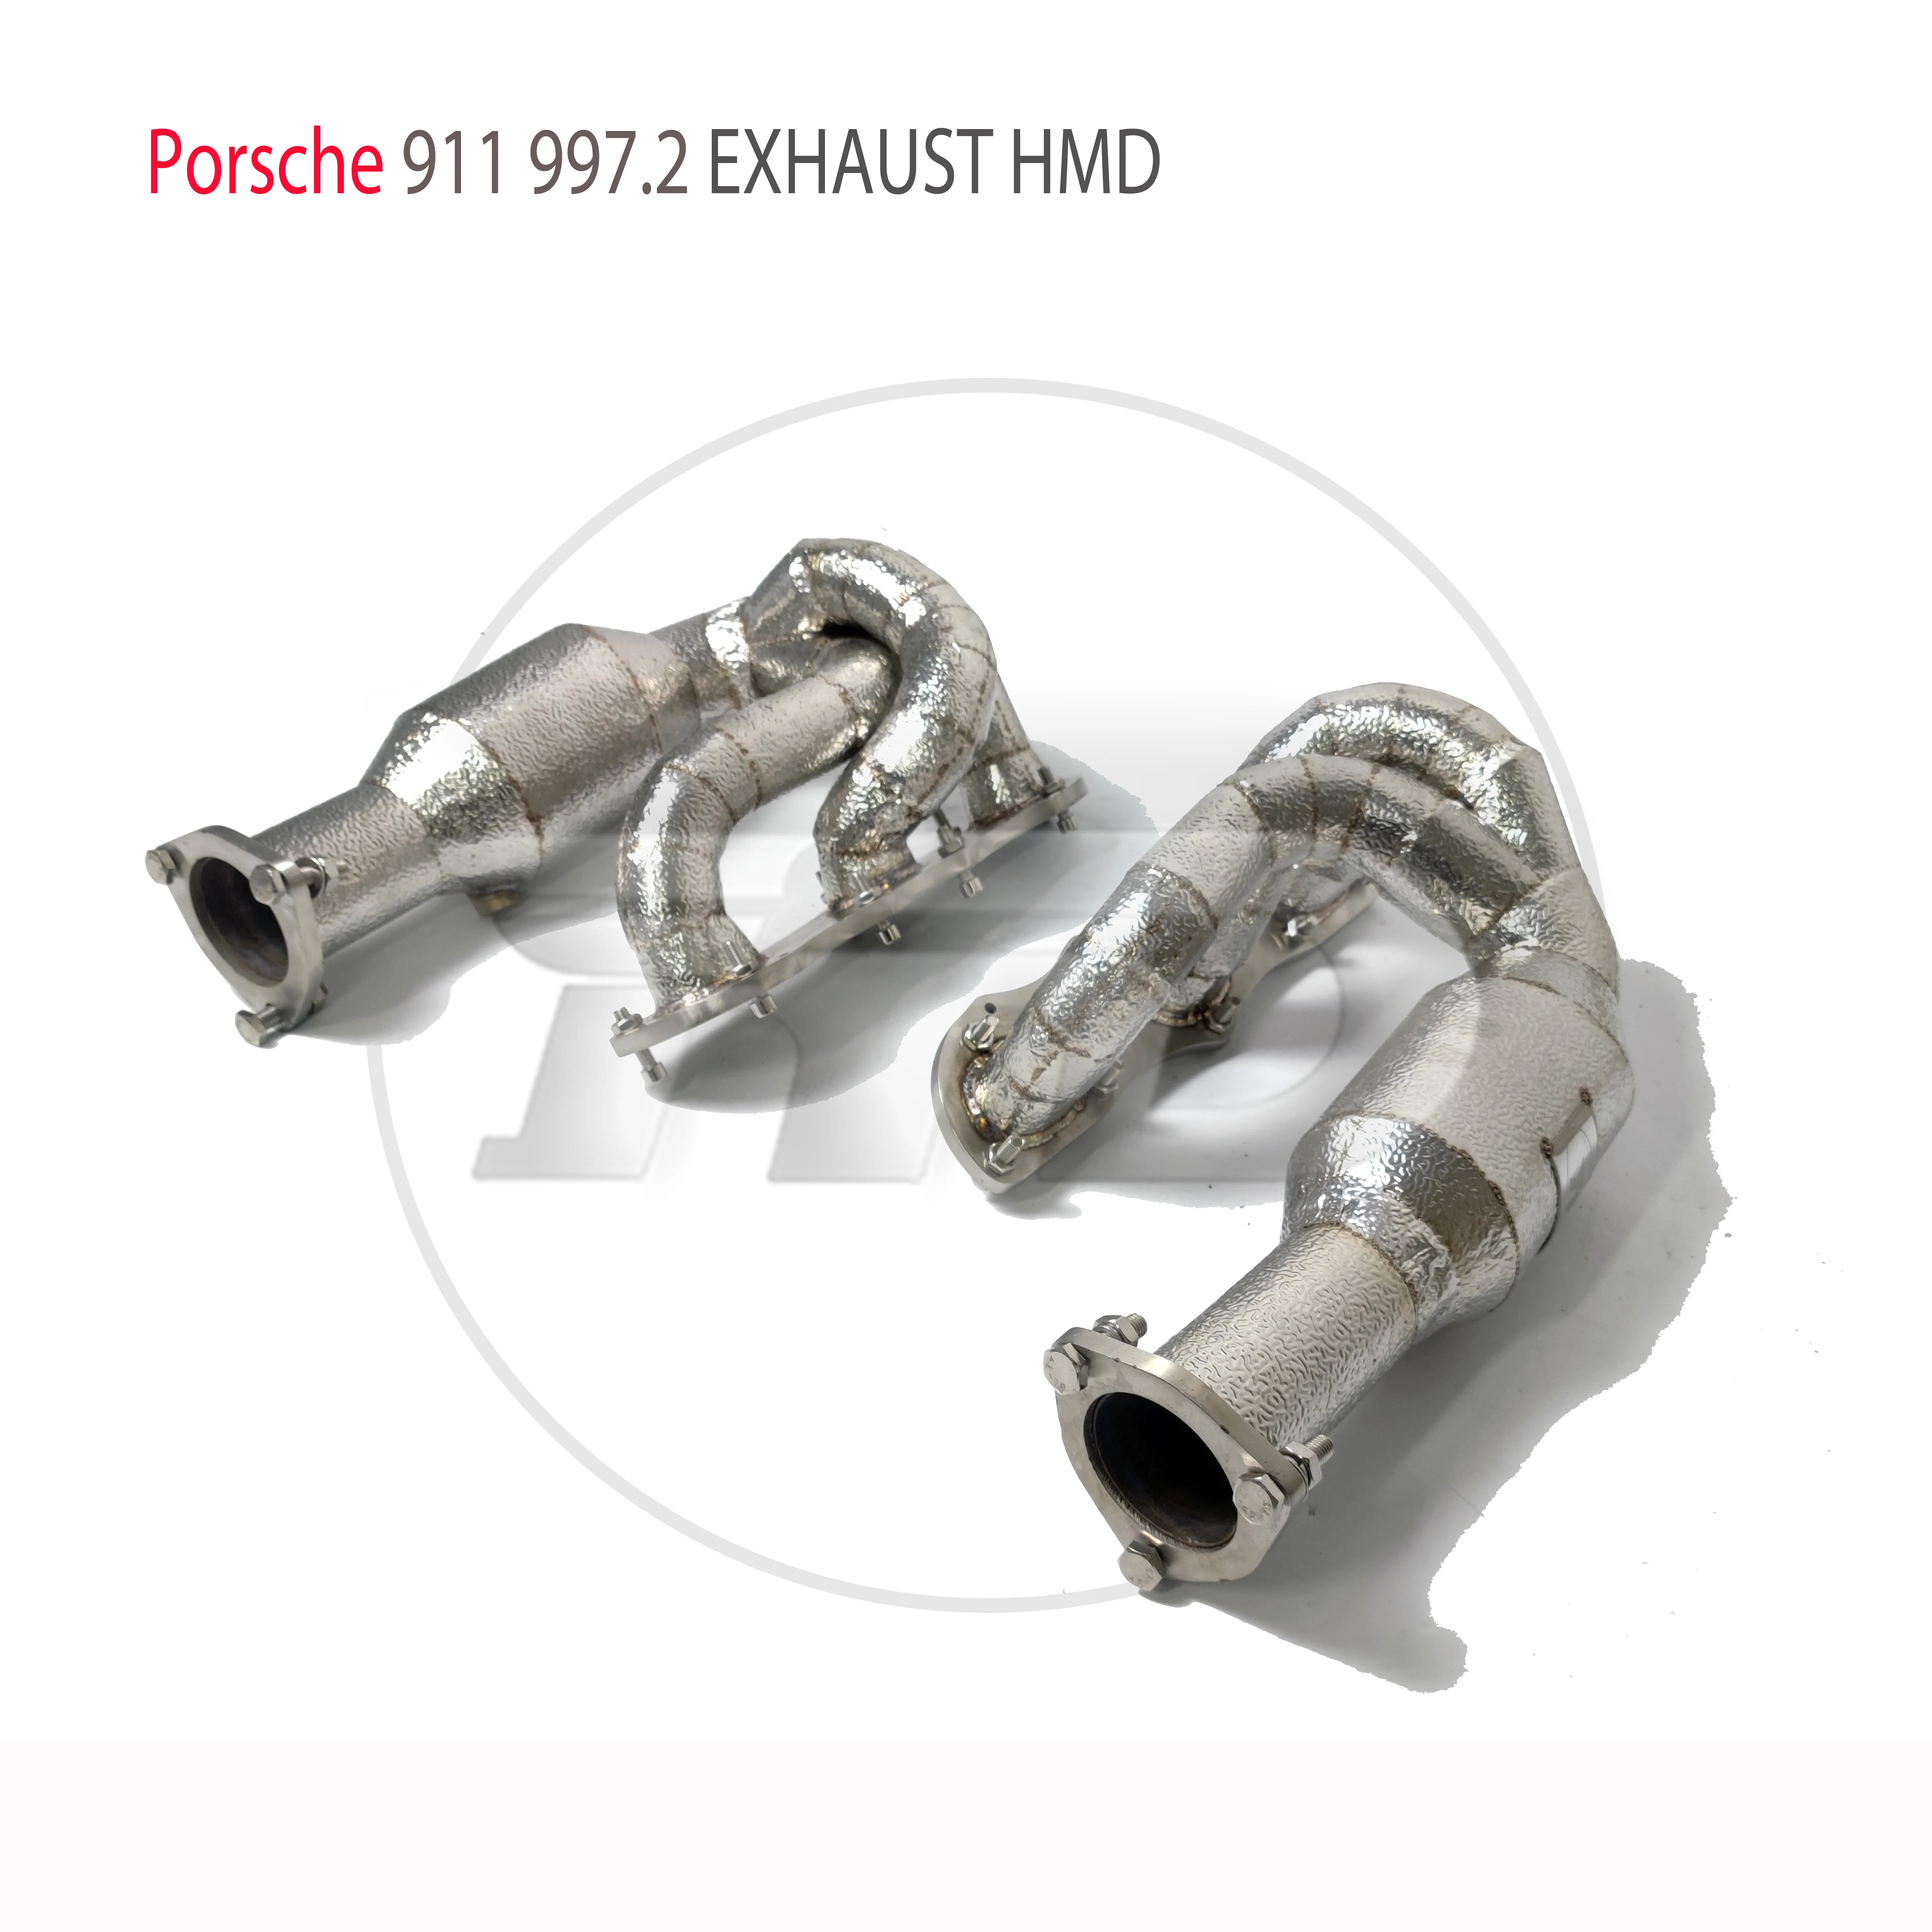 HMD Exhaust Manifold High Flow Downpipe for Porsche 911 997.2 Car Accessories With Catalytic Header Without Cat  Catless Pipe